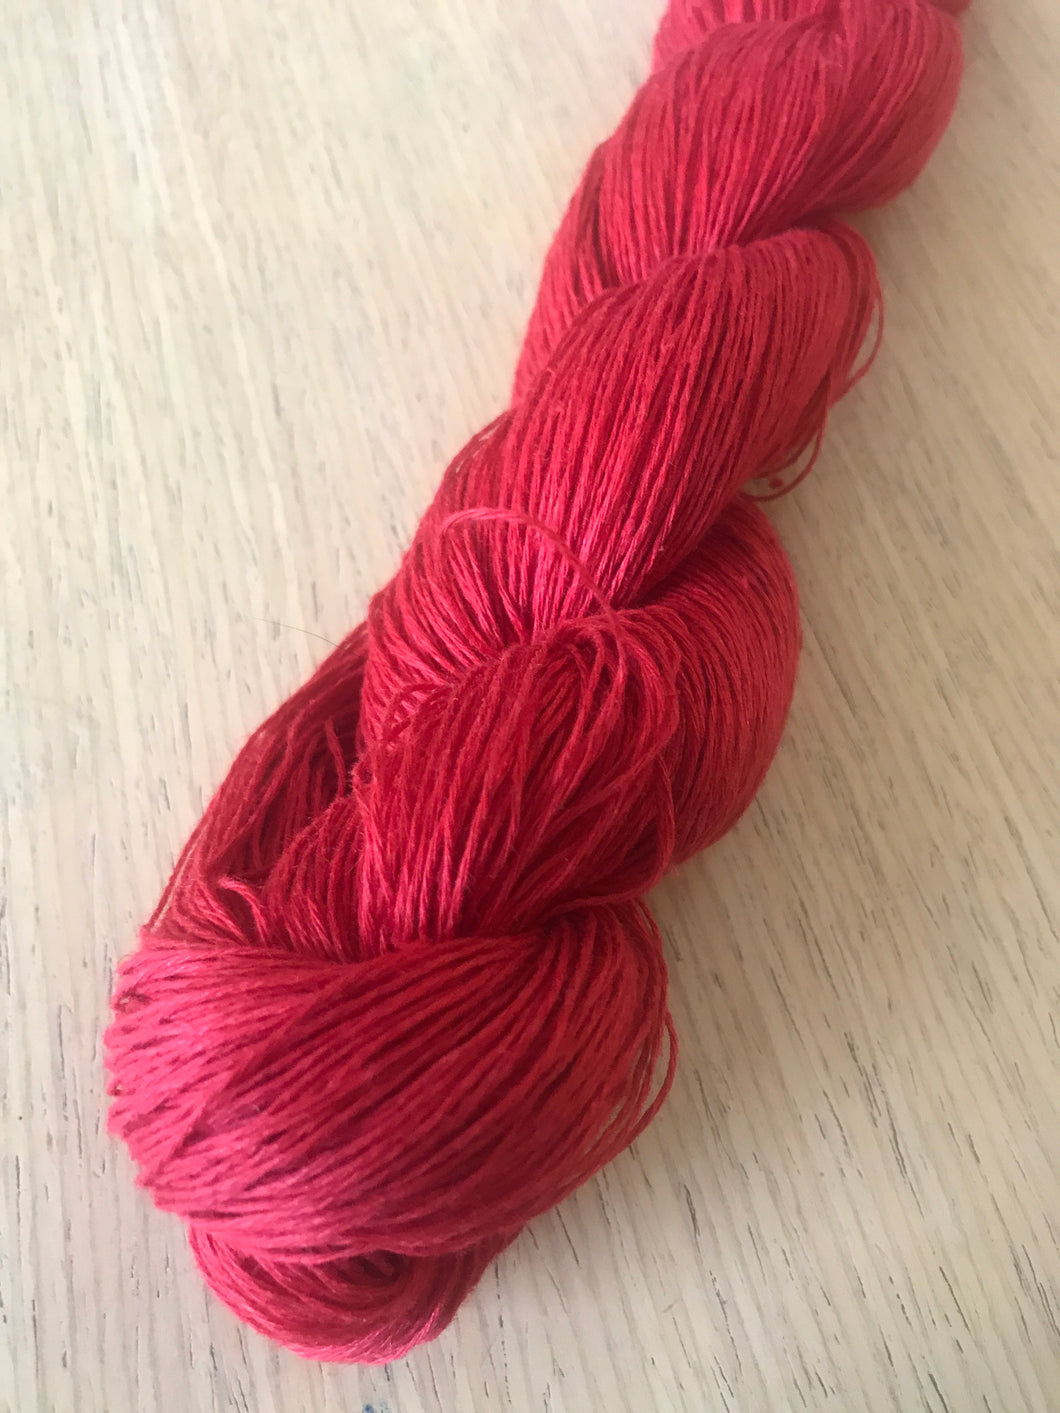 Lithuanian linen yarn by Midwinter colour 10.4